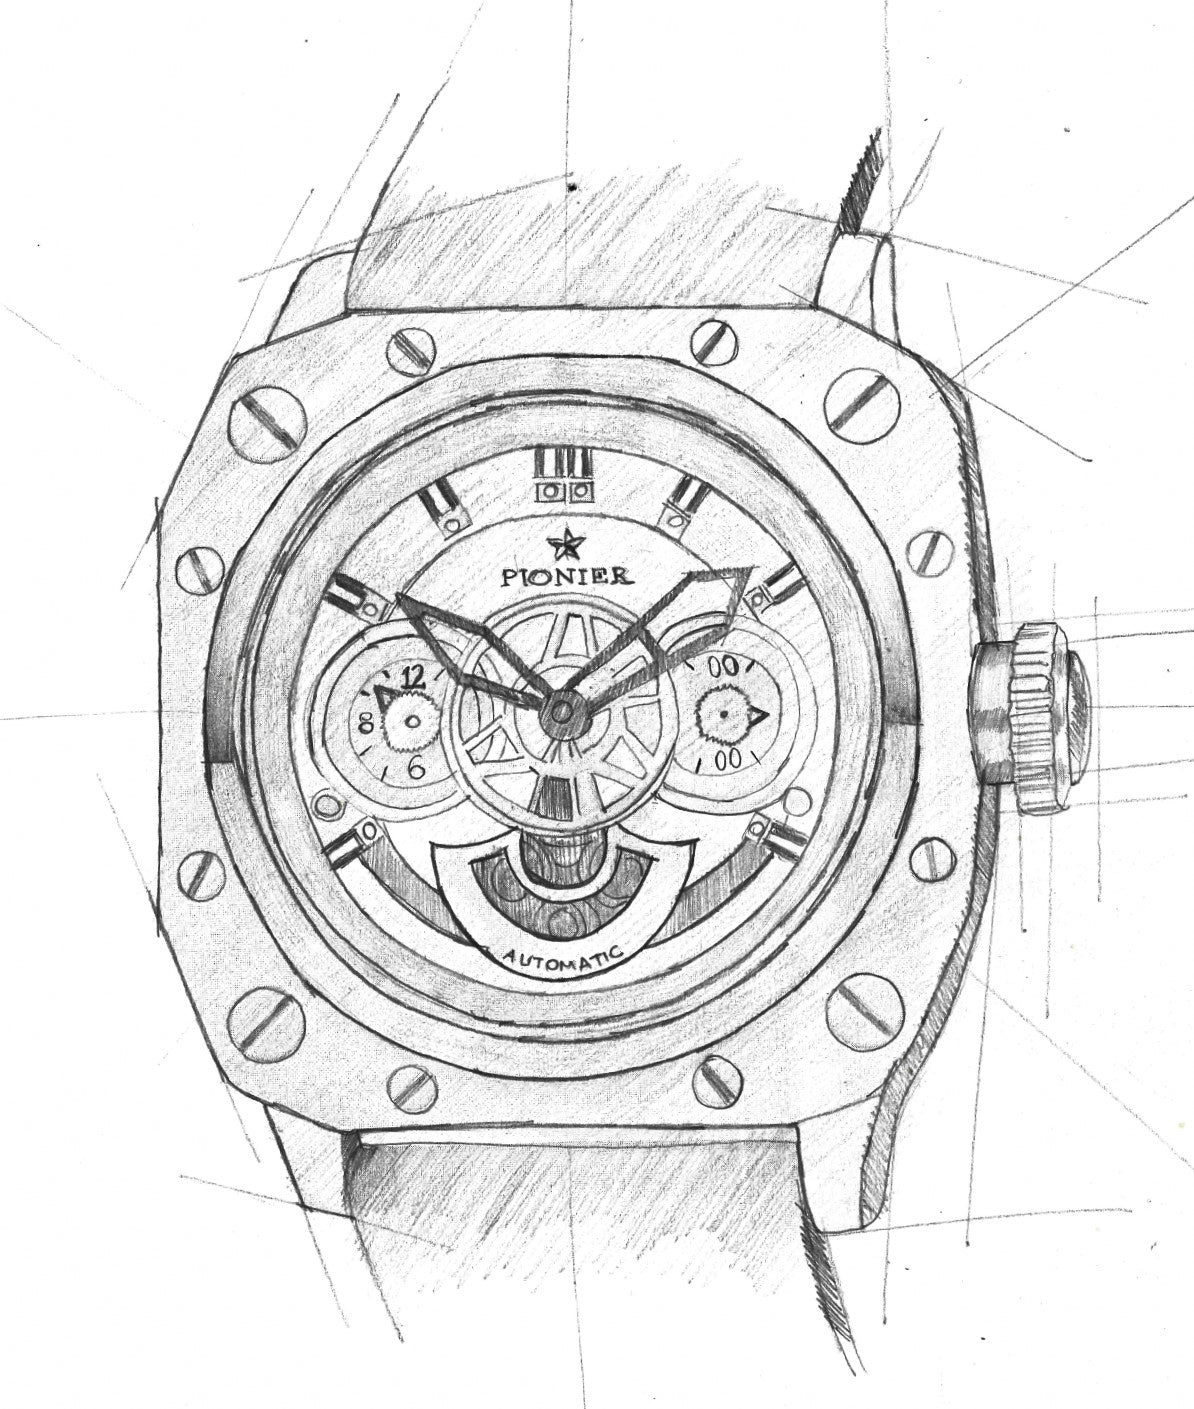 Hand drawing sketch of the collection Newport Pionier